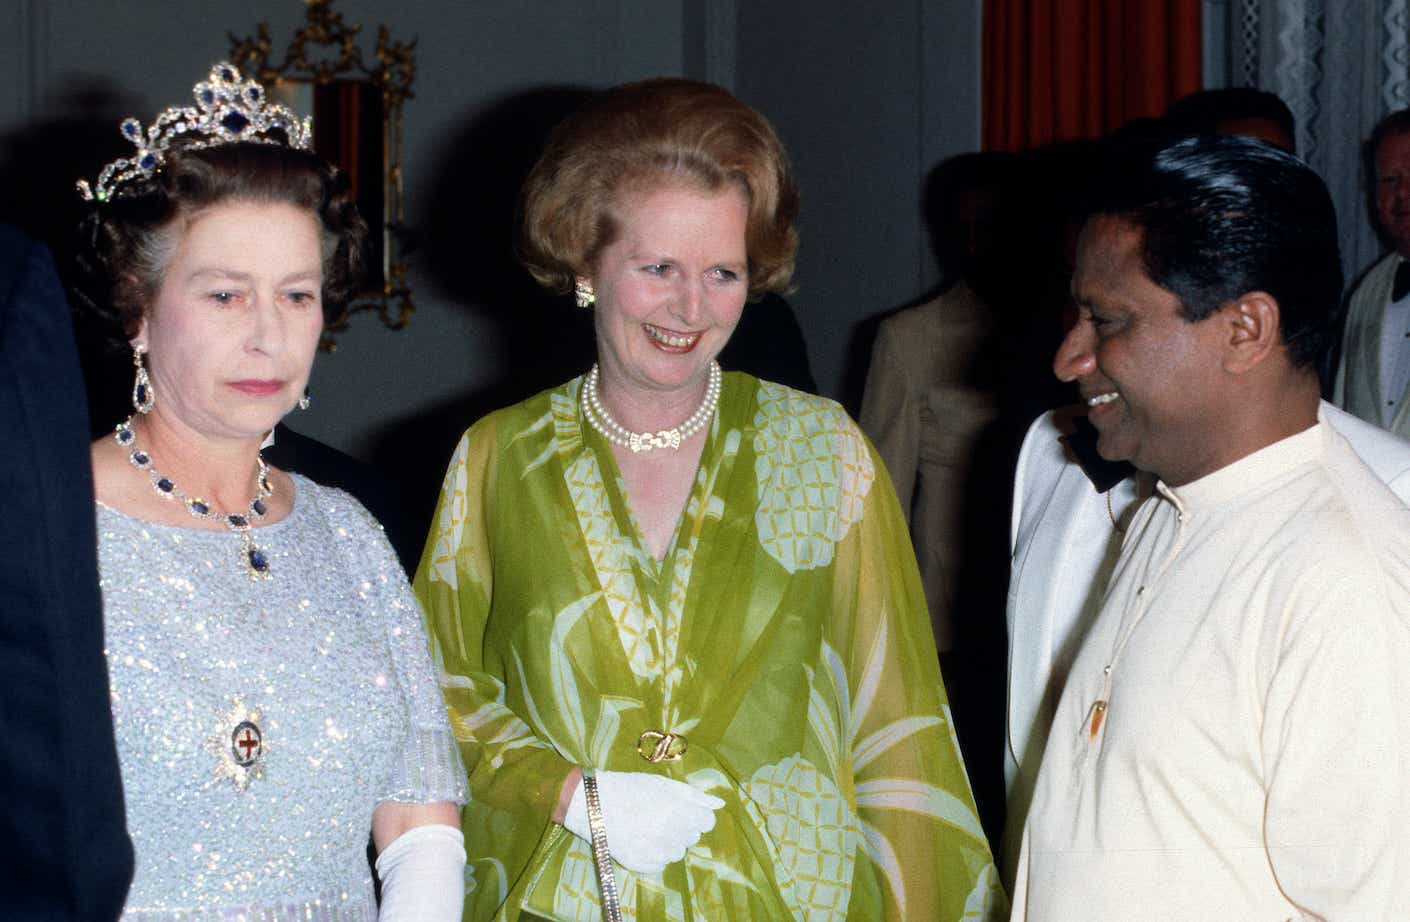 Queen Elizabeth II and Prime Minister Margaret Thatcher attend a ball to celebrate the Commonwealth Heads of Government Meeting hosted by President Kenneth Kaunda in 1979 in Lusaka, Zambia.